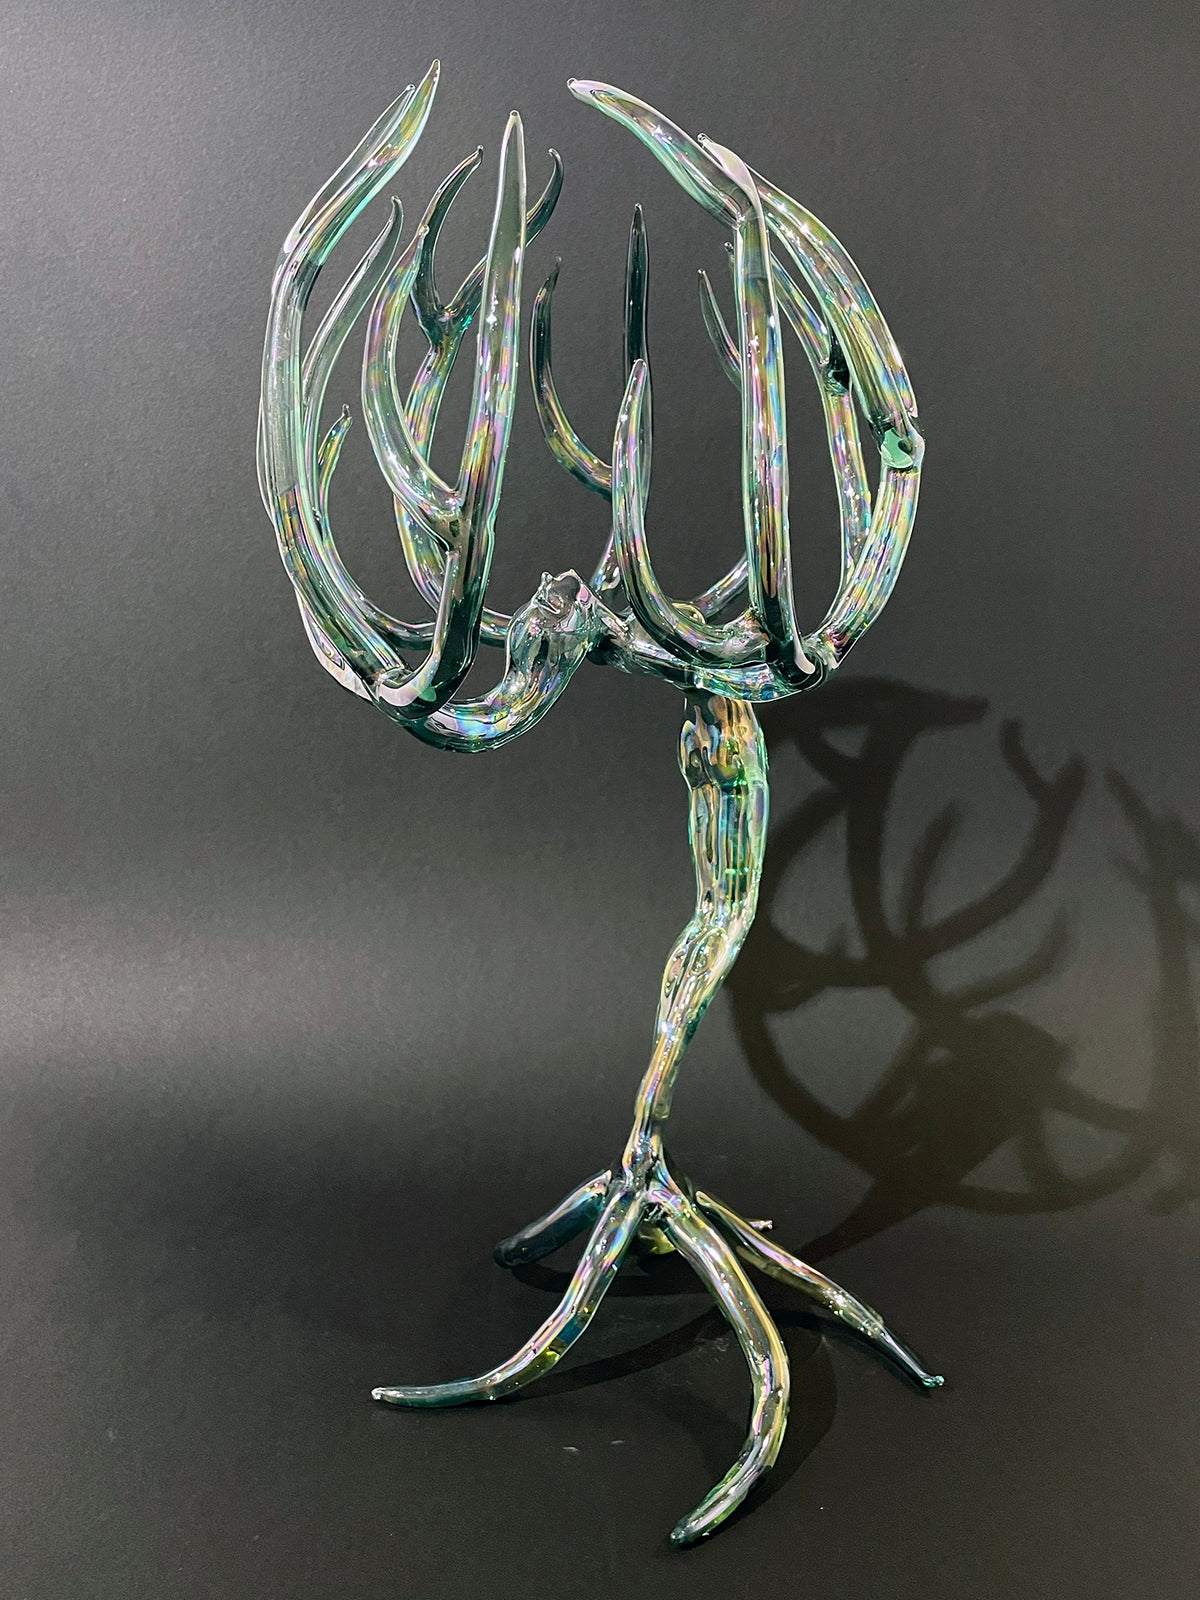 Hot Worked Glass Dryad by Sandra Young